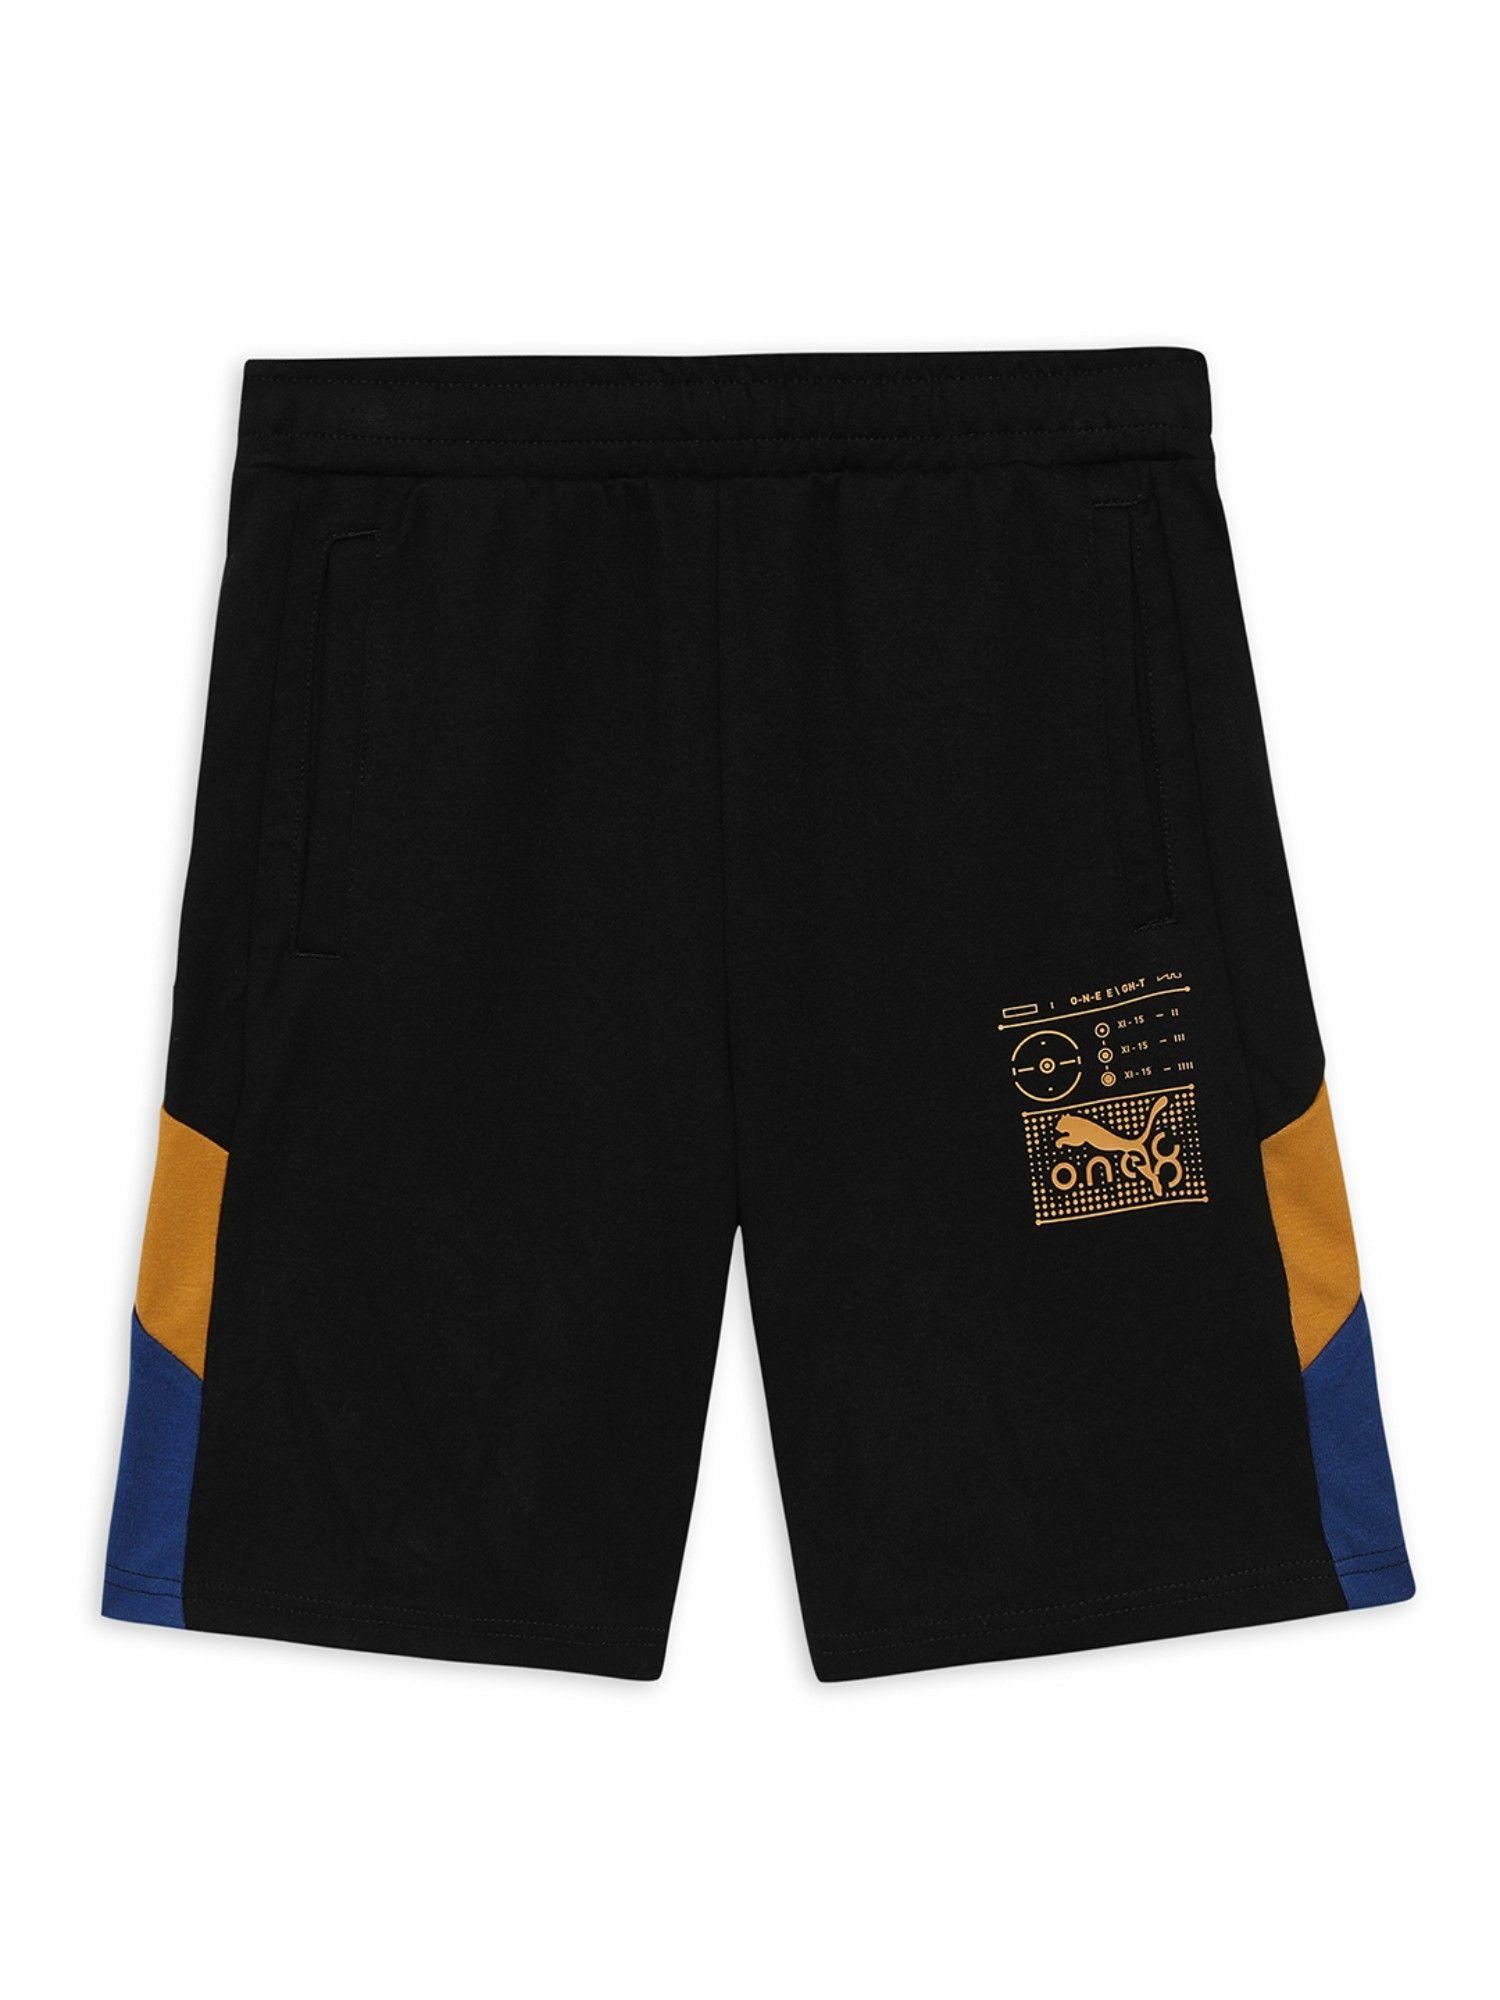 x one8 knitted boys black shorts